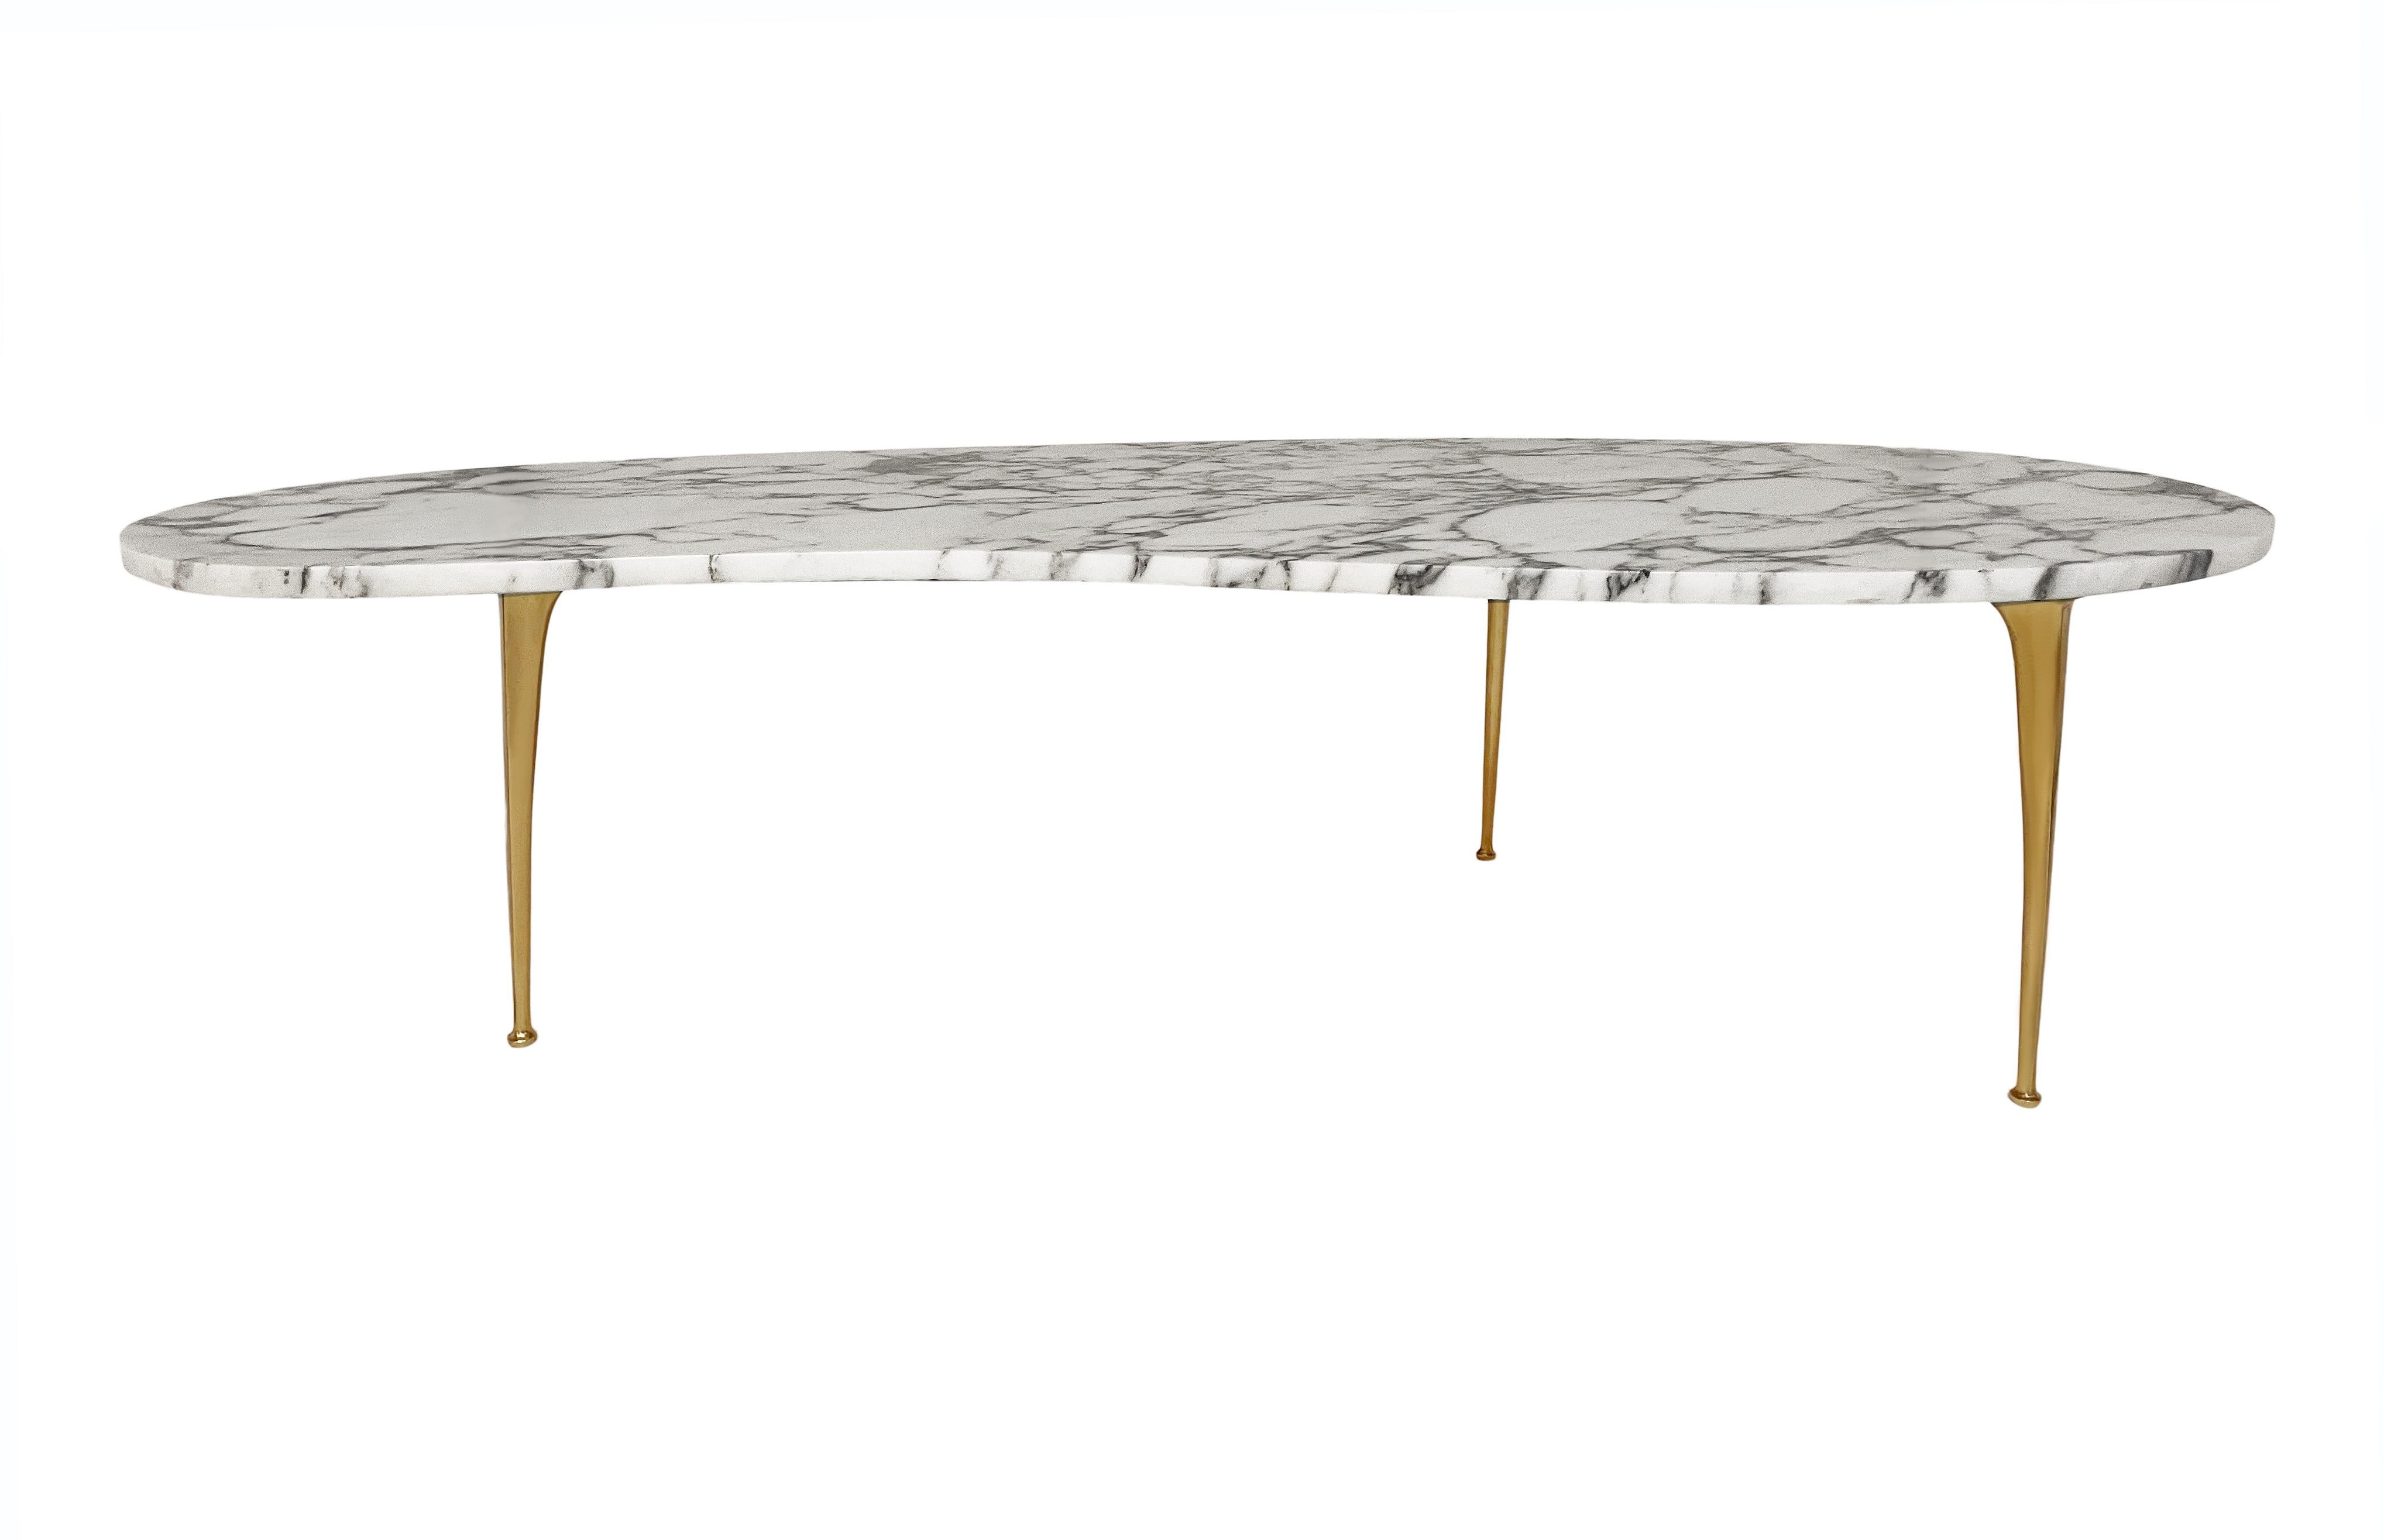 A stunning Italian coffee table from Italy circa 1960's. It features an elongated kidney shape top in Arabescato marble, with sexy brass stiletto legs.